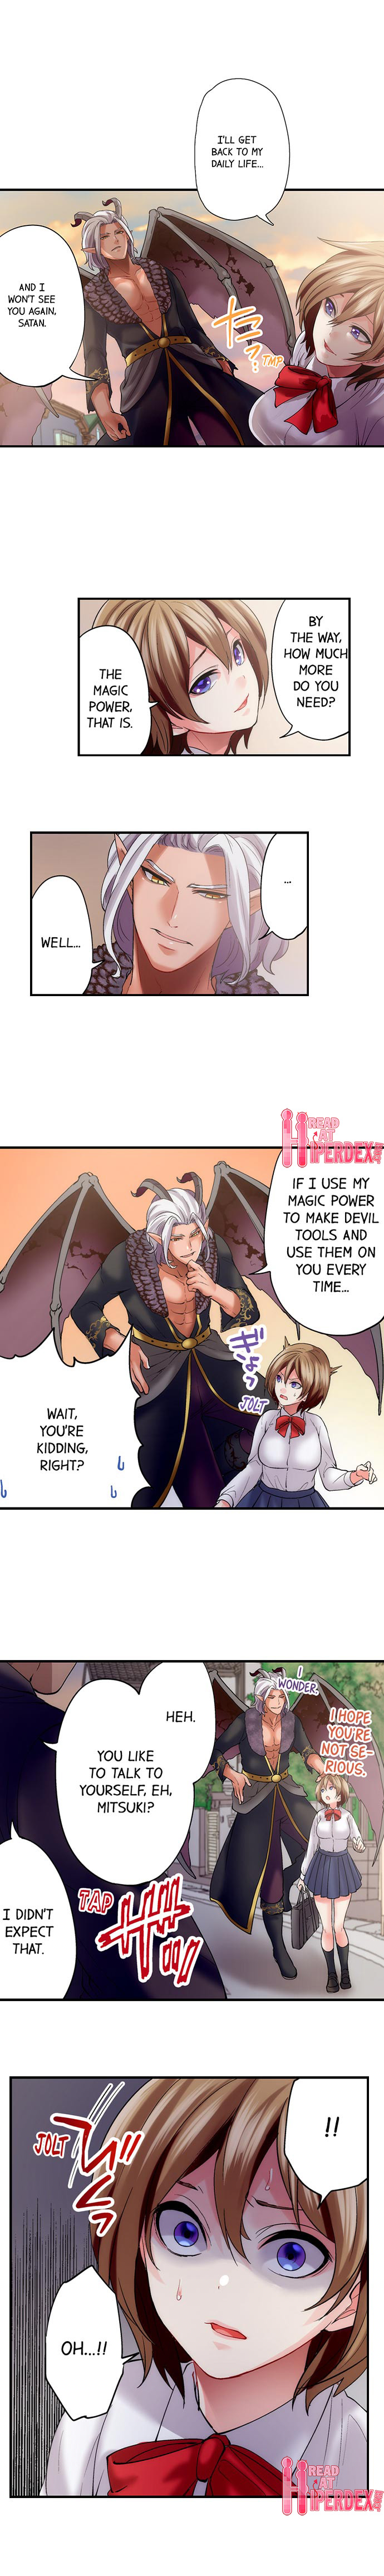 Made a Pact With a Demon: He Took My Virginity - Chapter 12 Page 7